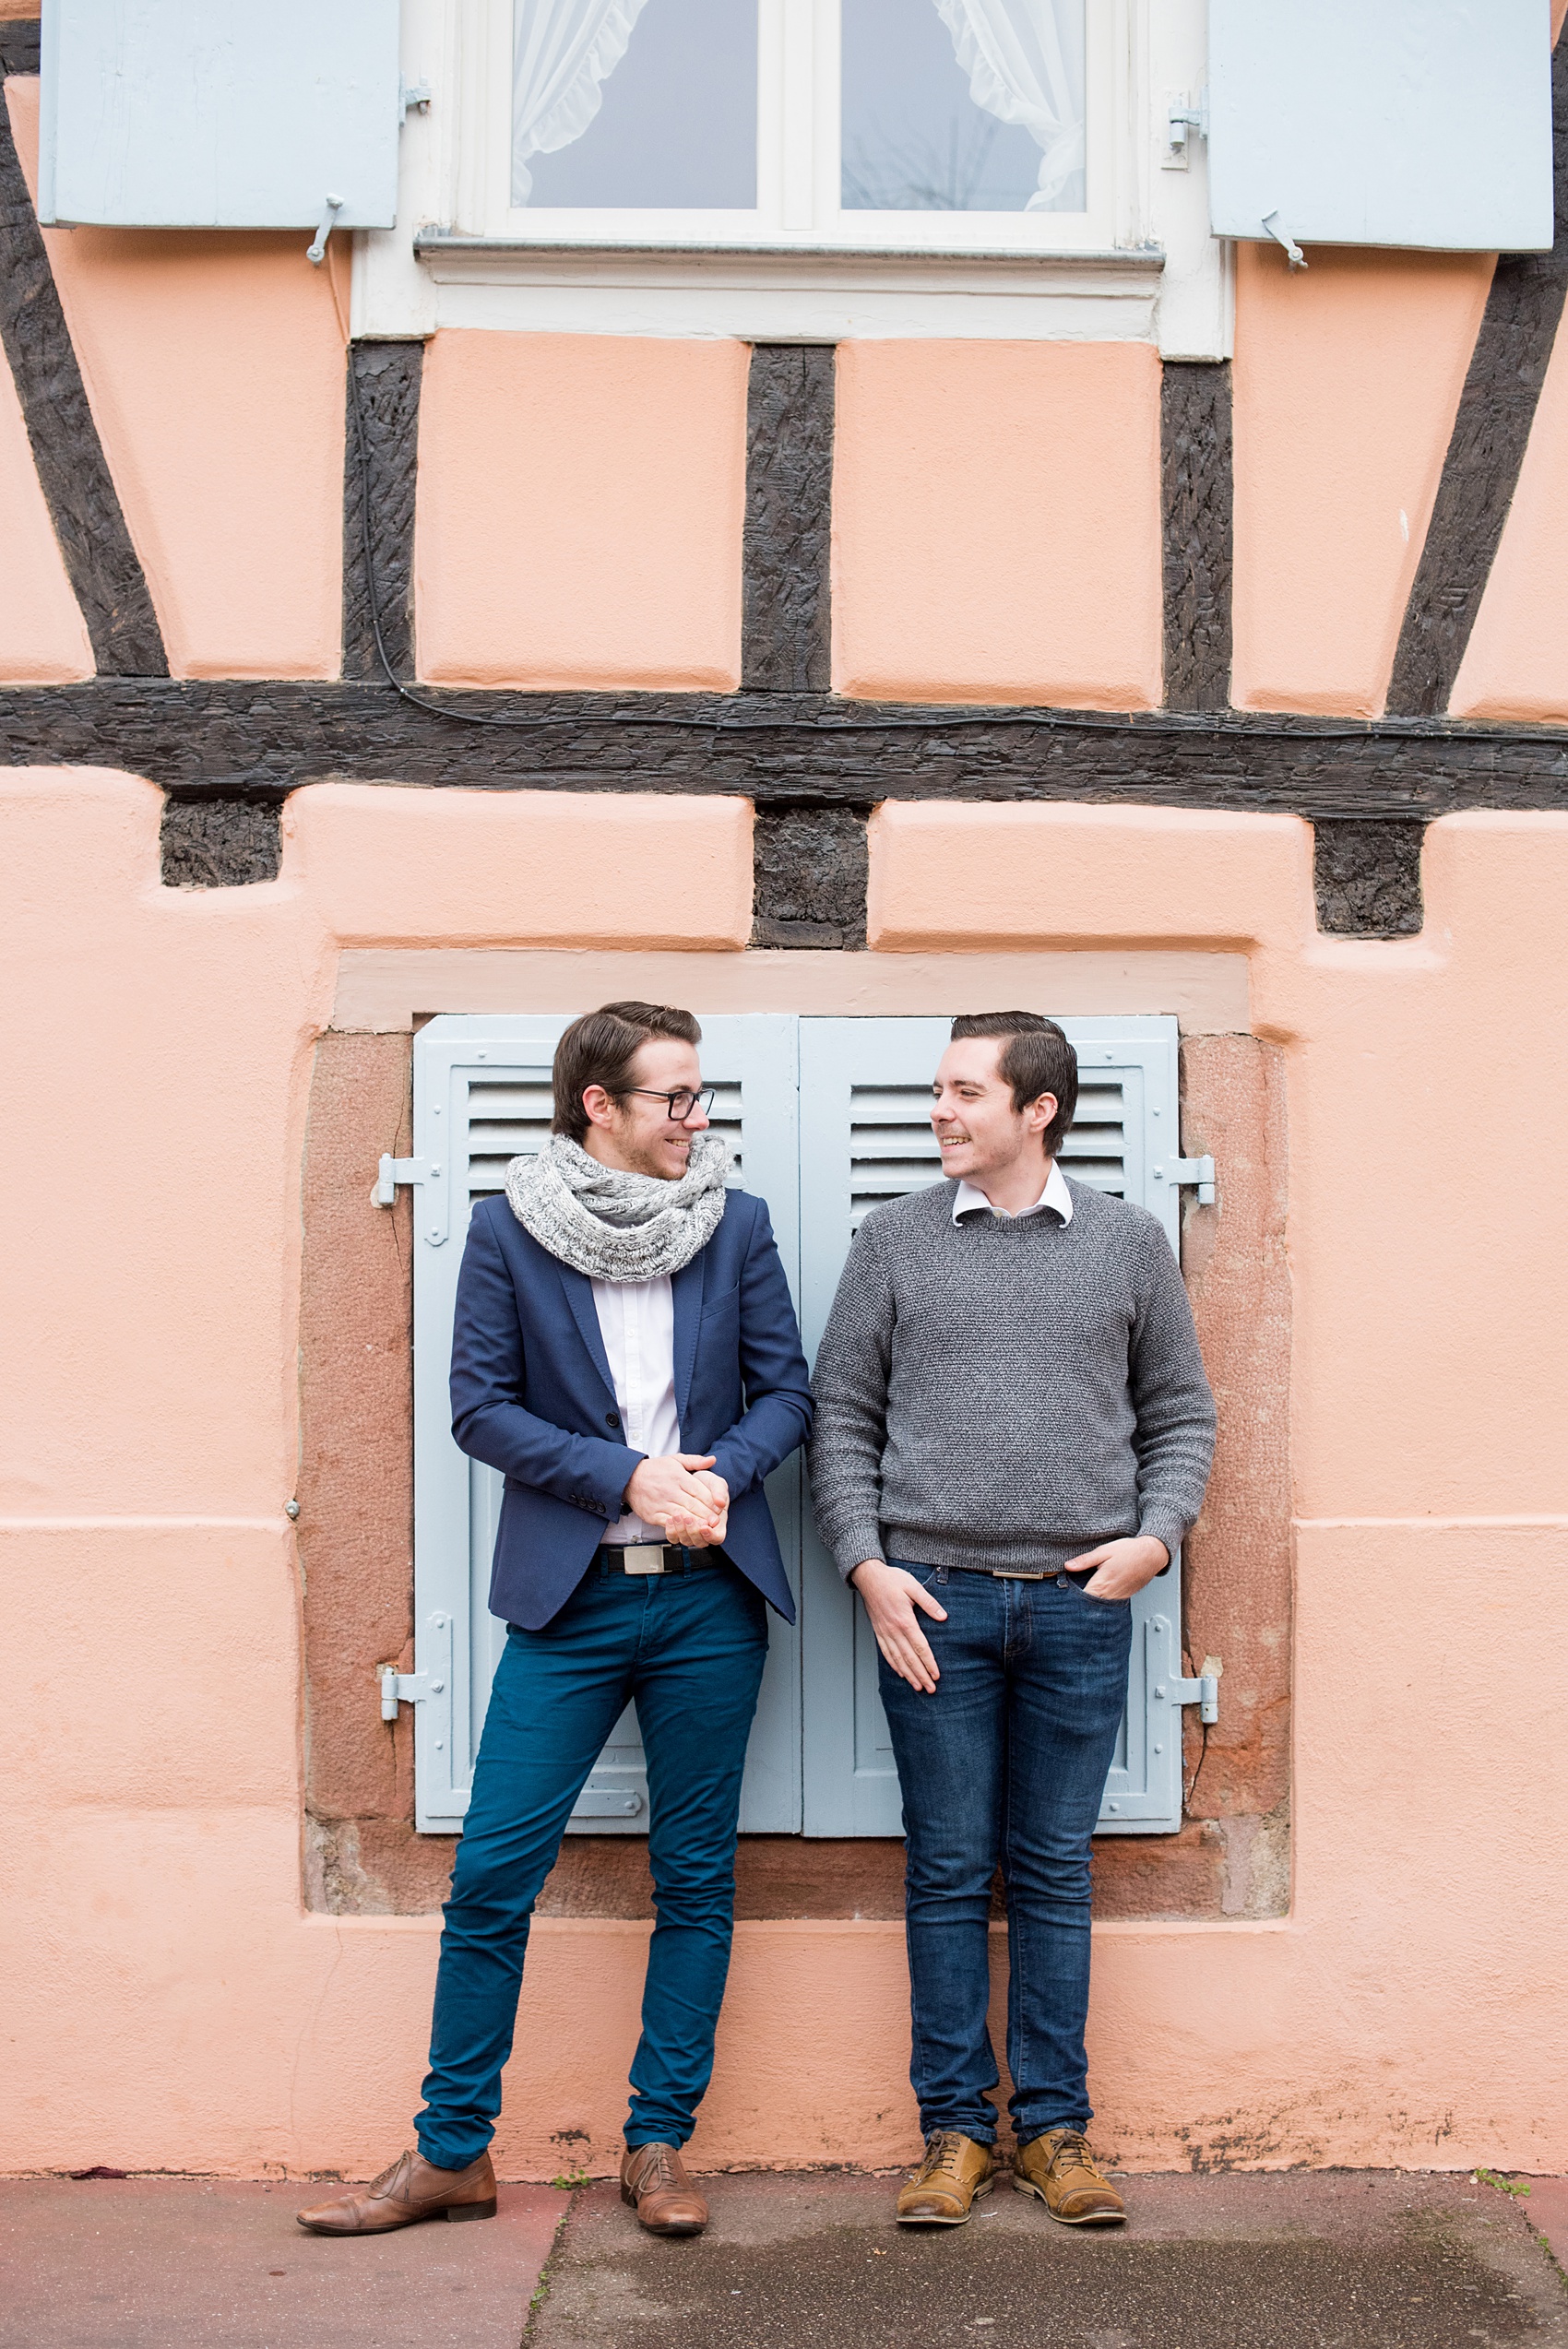 Mikkel Paige Photography pictures of an engagement session in Colmar, France in the Alsace region. Photo of the same sex gay couple with a colorful pink and blue building.